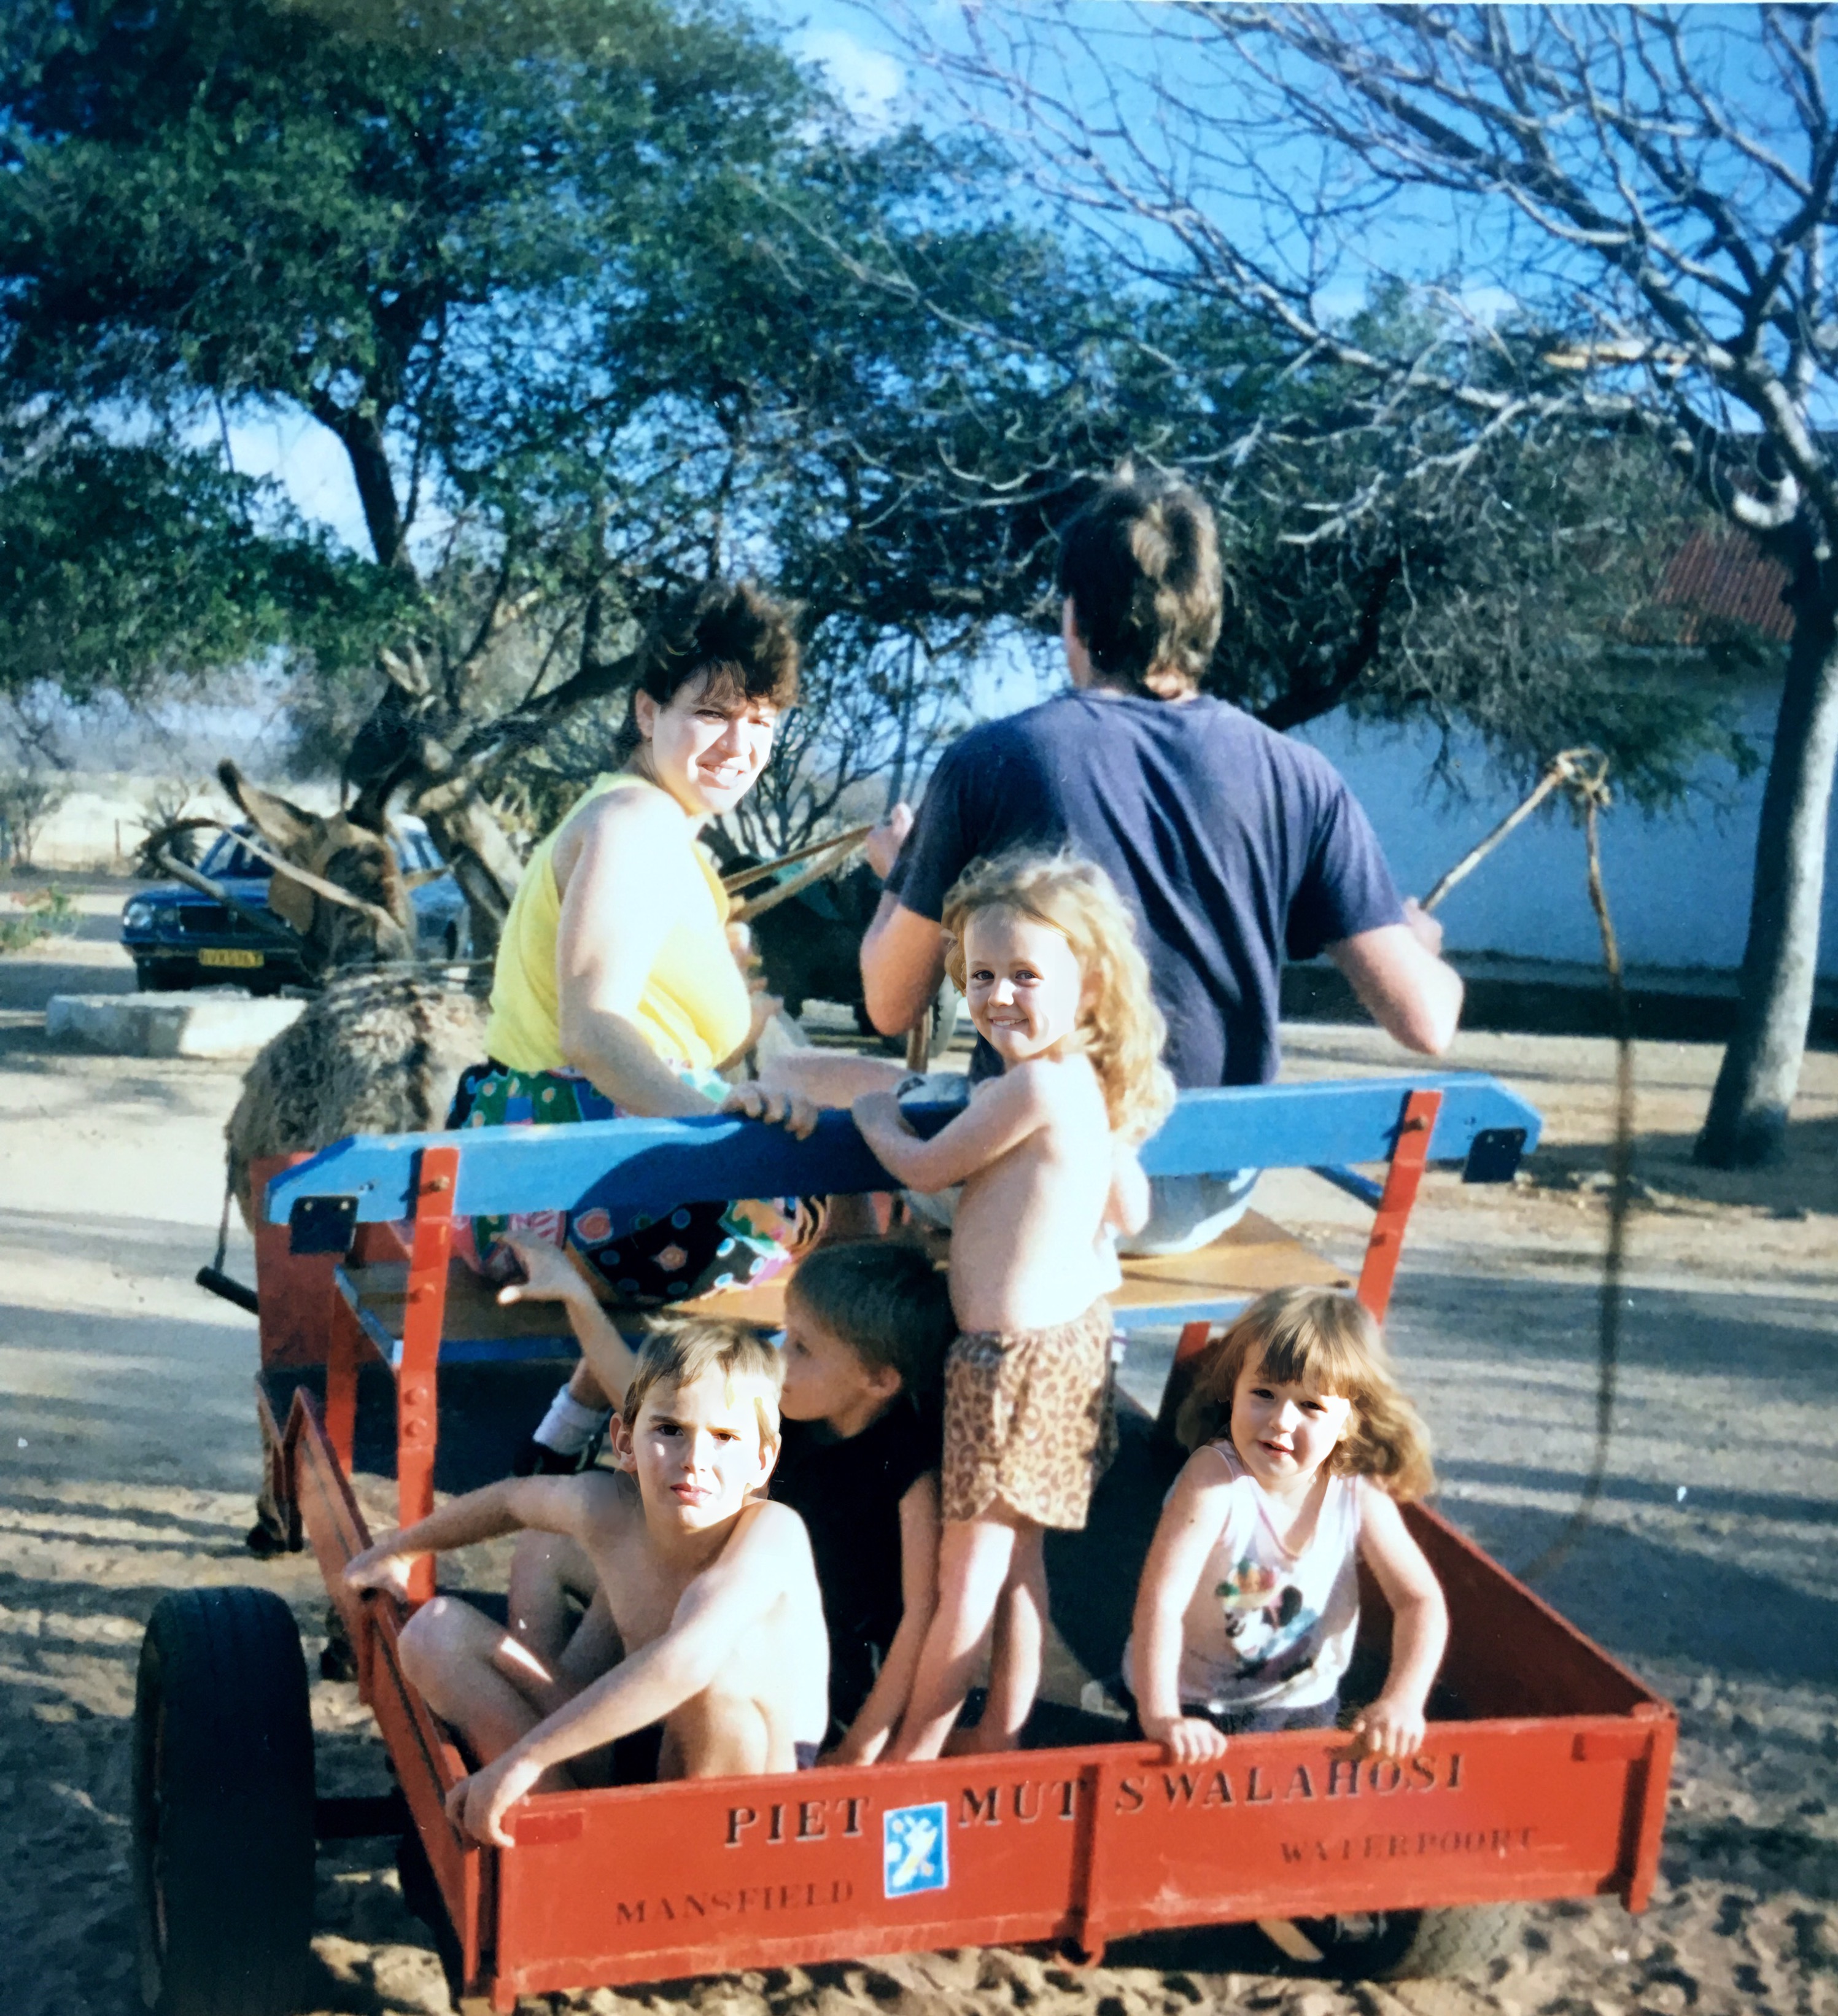 Riding in a donkey cart. Mandfield Farm , Limpopo Douth Africa dometime in 1988